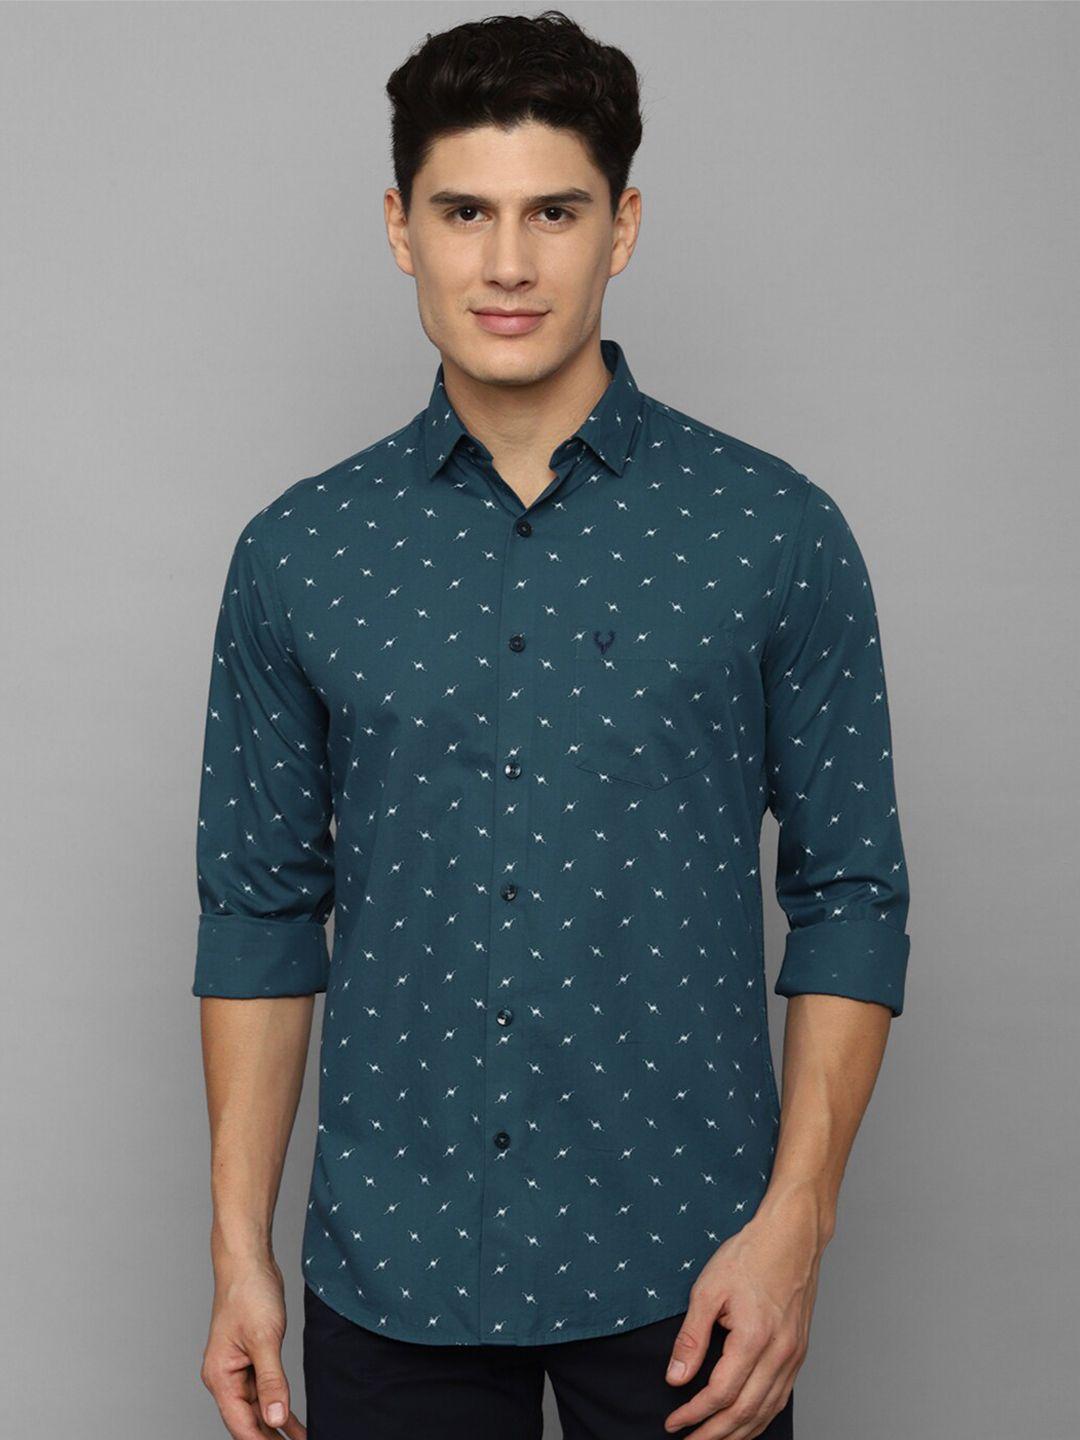 allen solly slim fit conversational printed pure cotton casual shirt